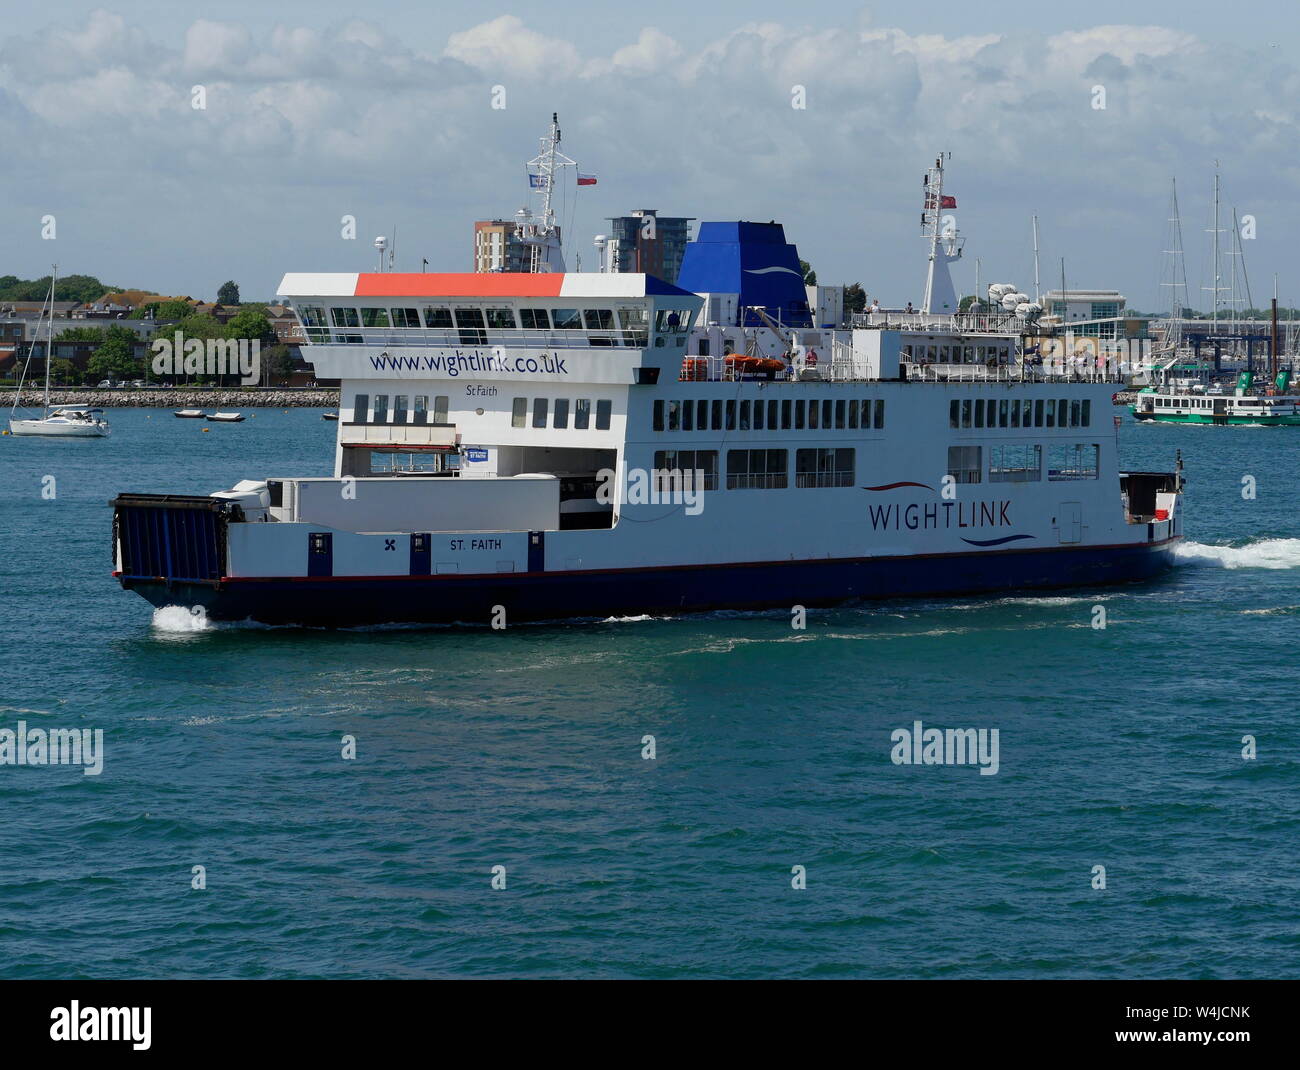 AJAXNETPHOTO. 3RD JUNE, 2019.  PORTSMOUTH, ENGLAND - PORTSMOUTH TO ISLE OF WIGHT WIGHT LINK ST.FAITH LEAVING HARBOUR. PHOTO:JONATHAN EASTLAND/AJAX REF:GX8 190306 326 Stock Photo